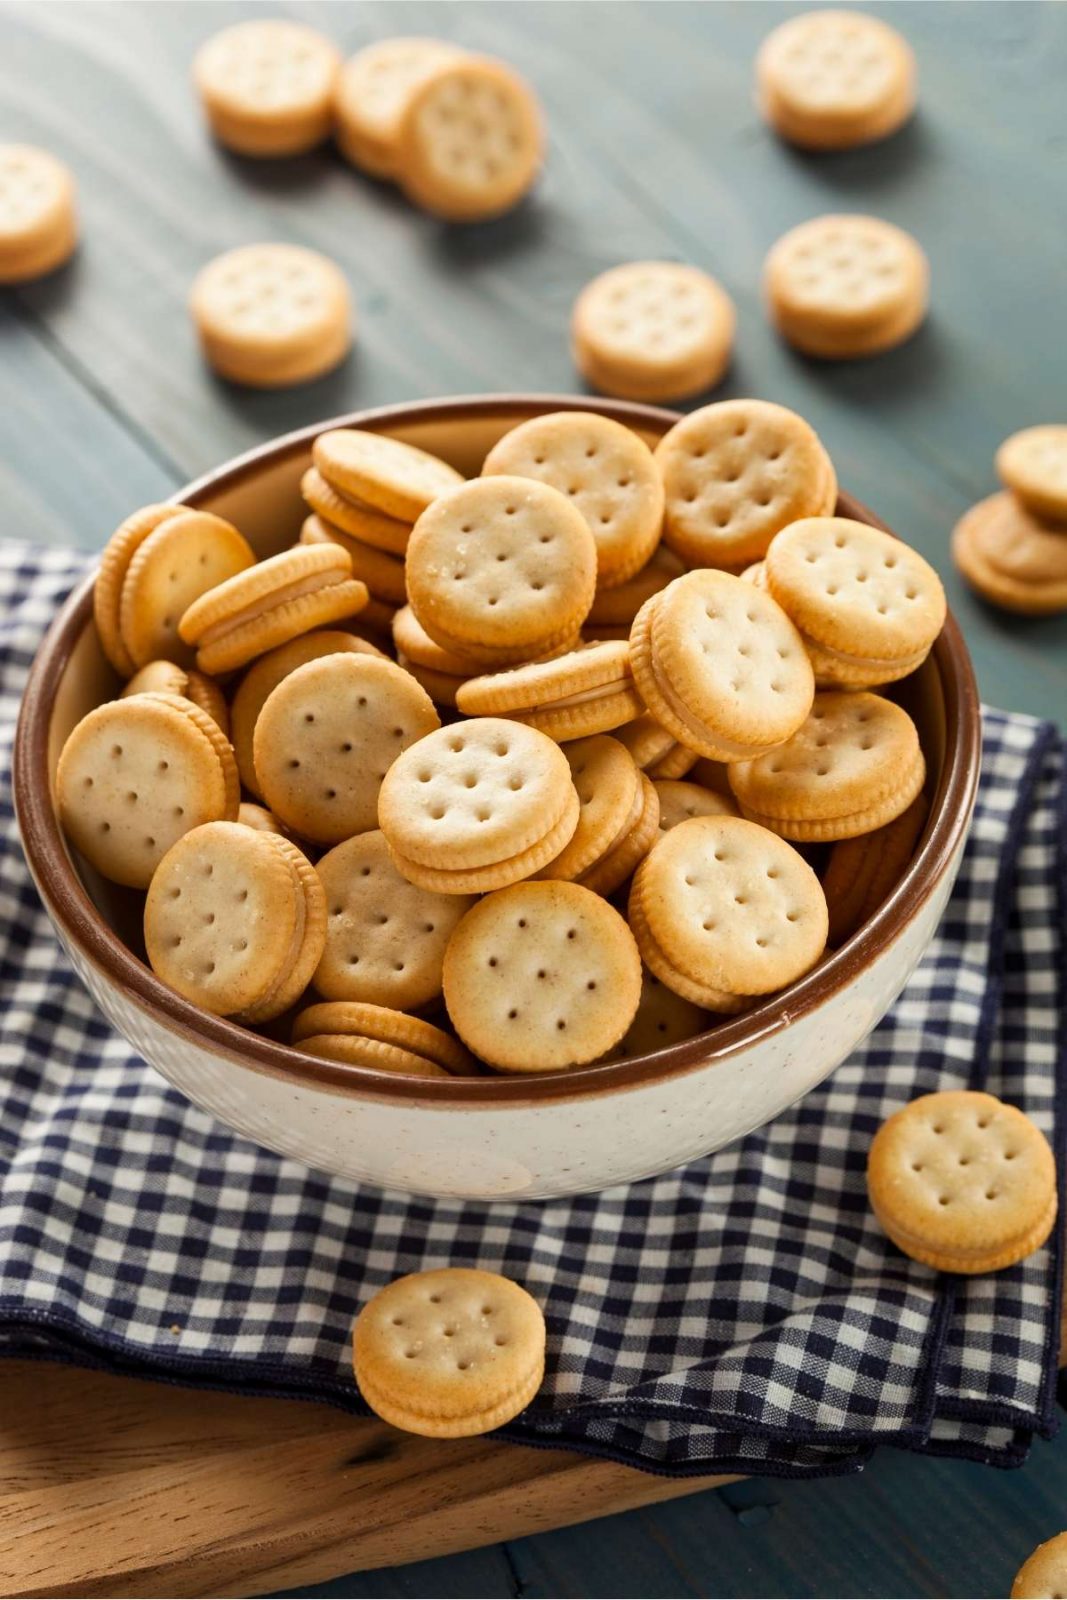 Ritz Crackers are an incredibly popular snack thanks to their simple flavor and wide variety of options. But are Ritz crackers vegan? Read on to find out more.